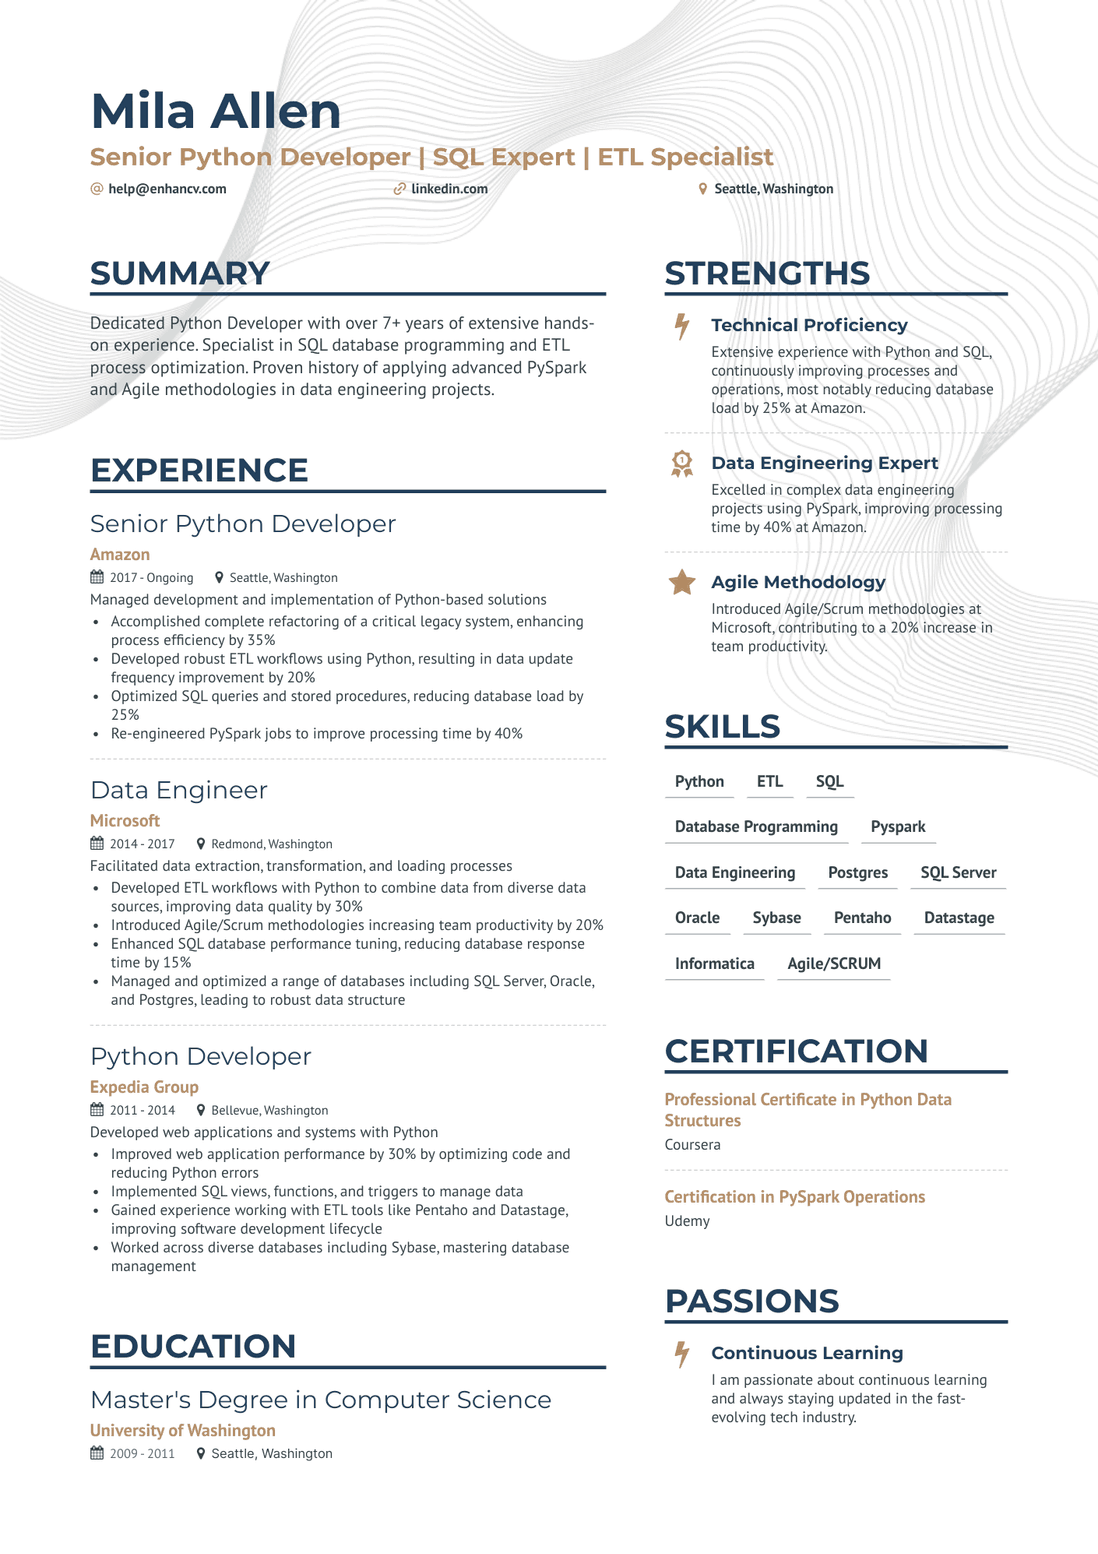 sample resume for software developer with 2 years experience